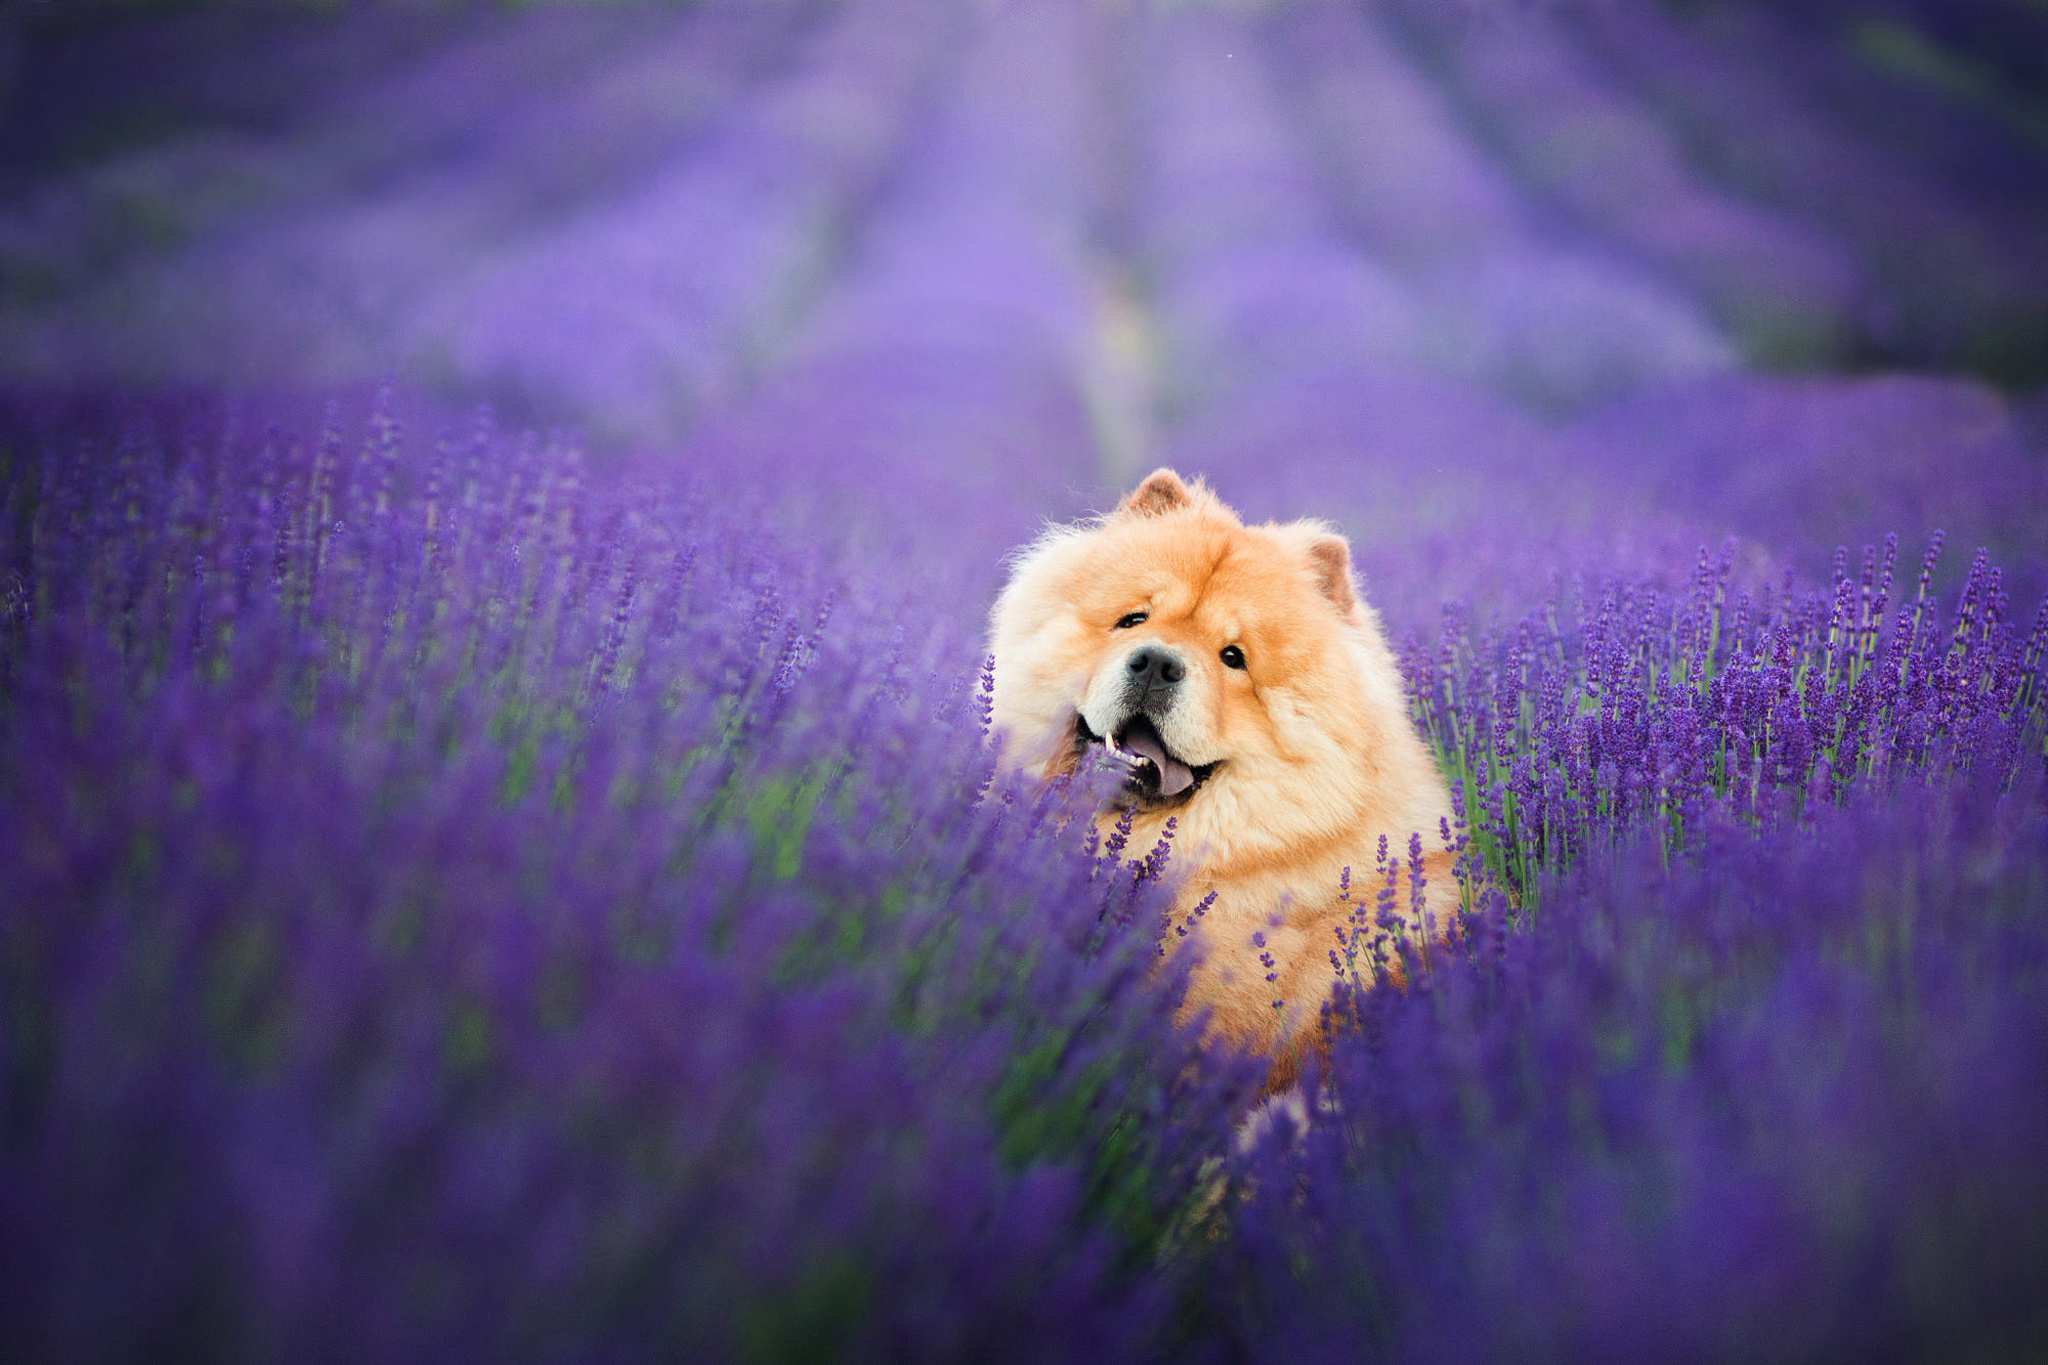 Dog in a lavender field